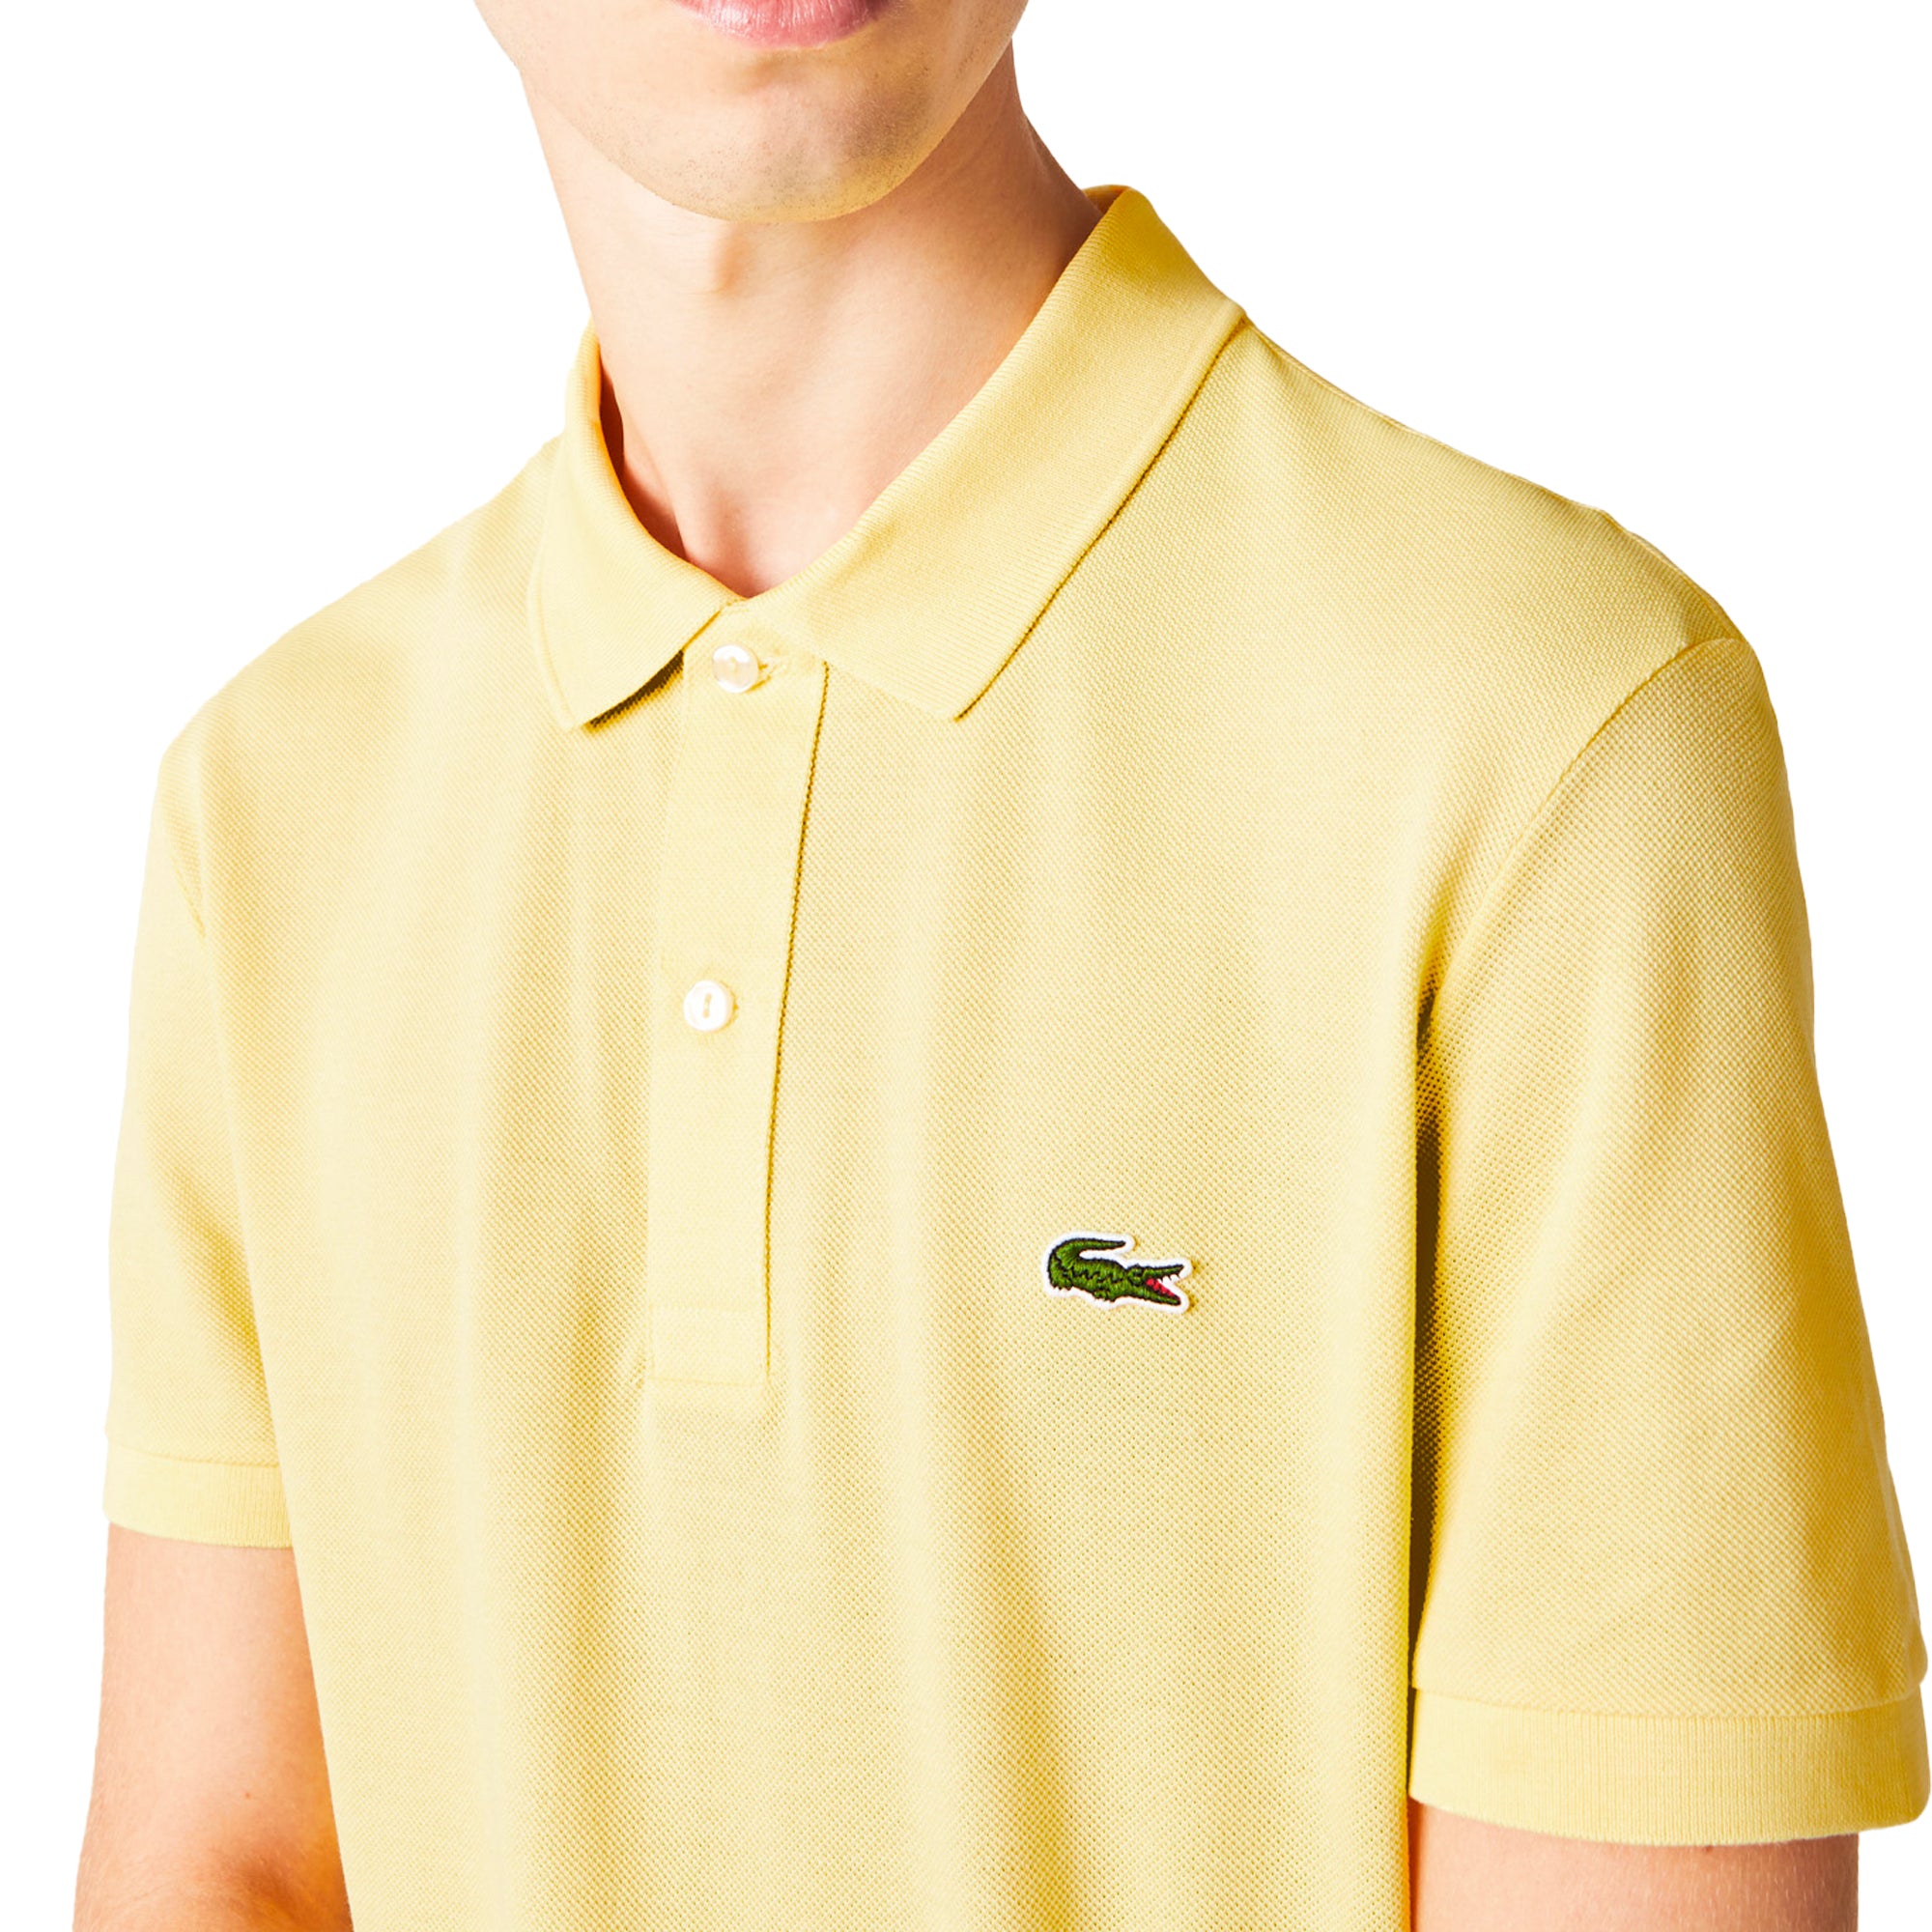 Lacoste Short Sleeved Slim Fit Polo PH4012 - Yellow